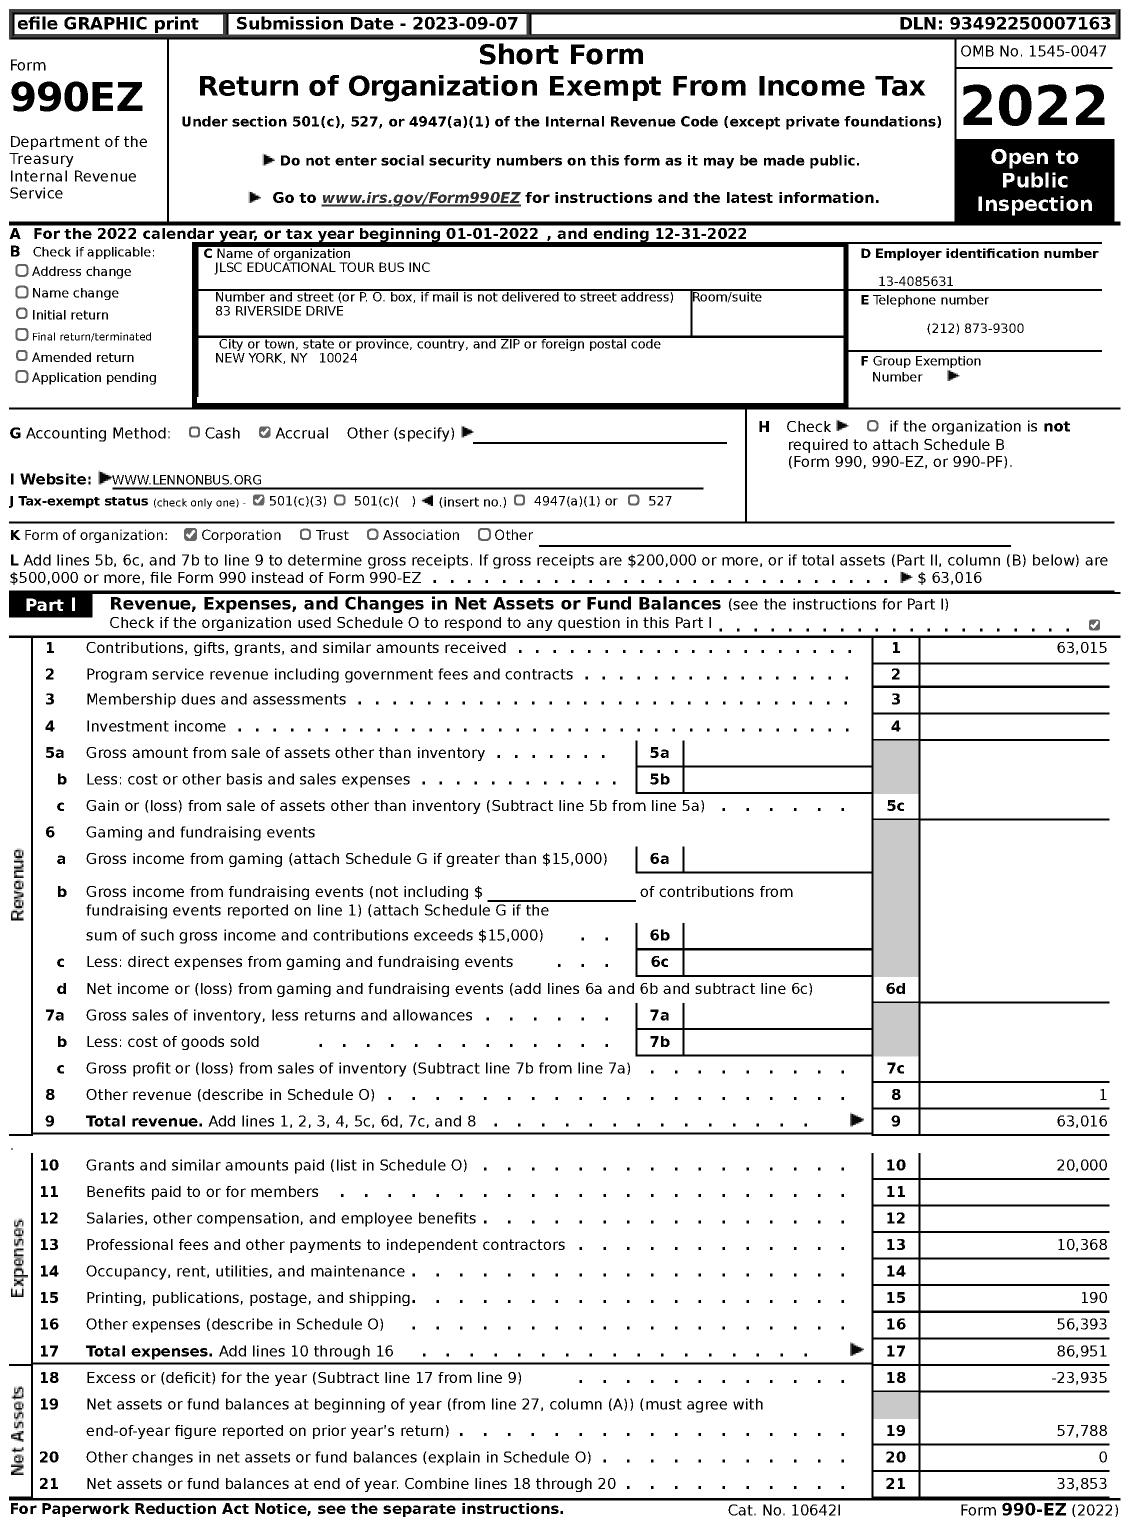 Image of first page of 2022 Form 990EZ for JLSC Educational Tour Bus